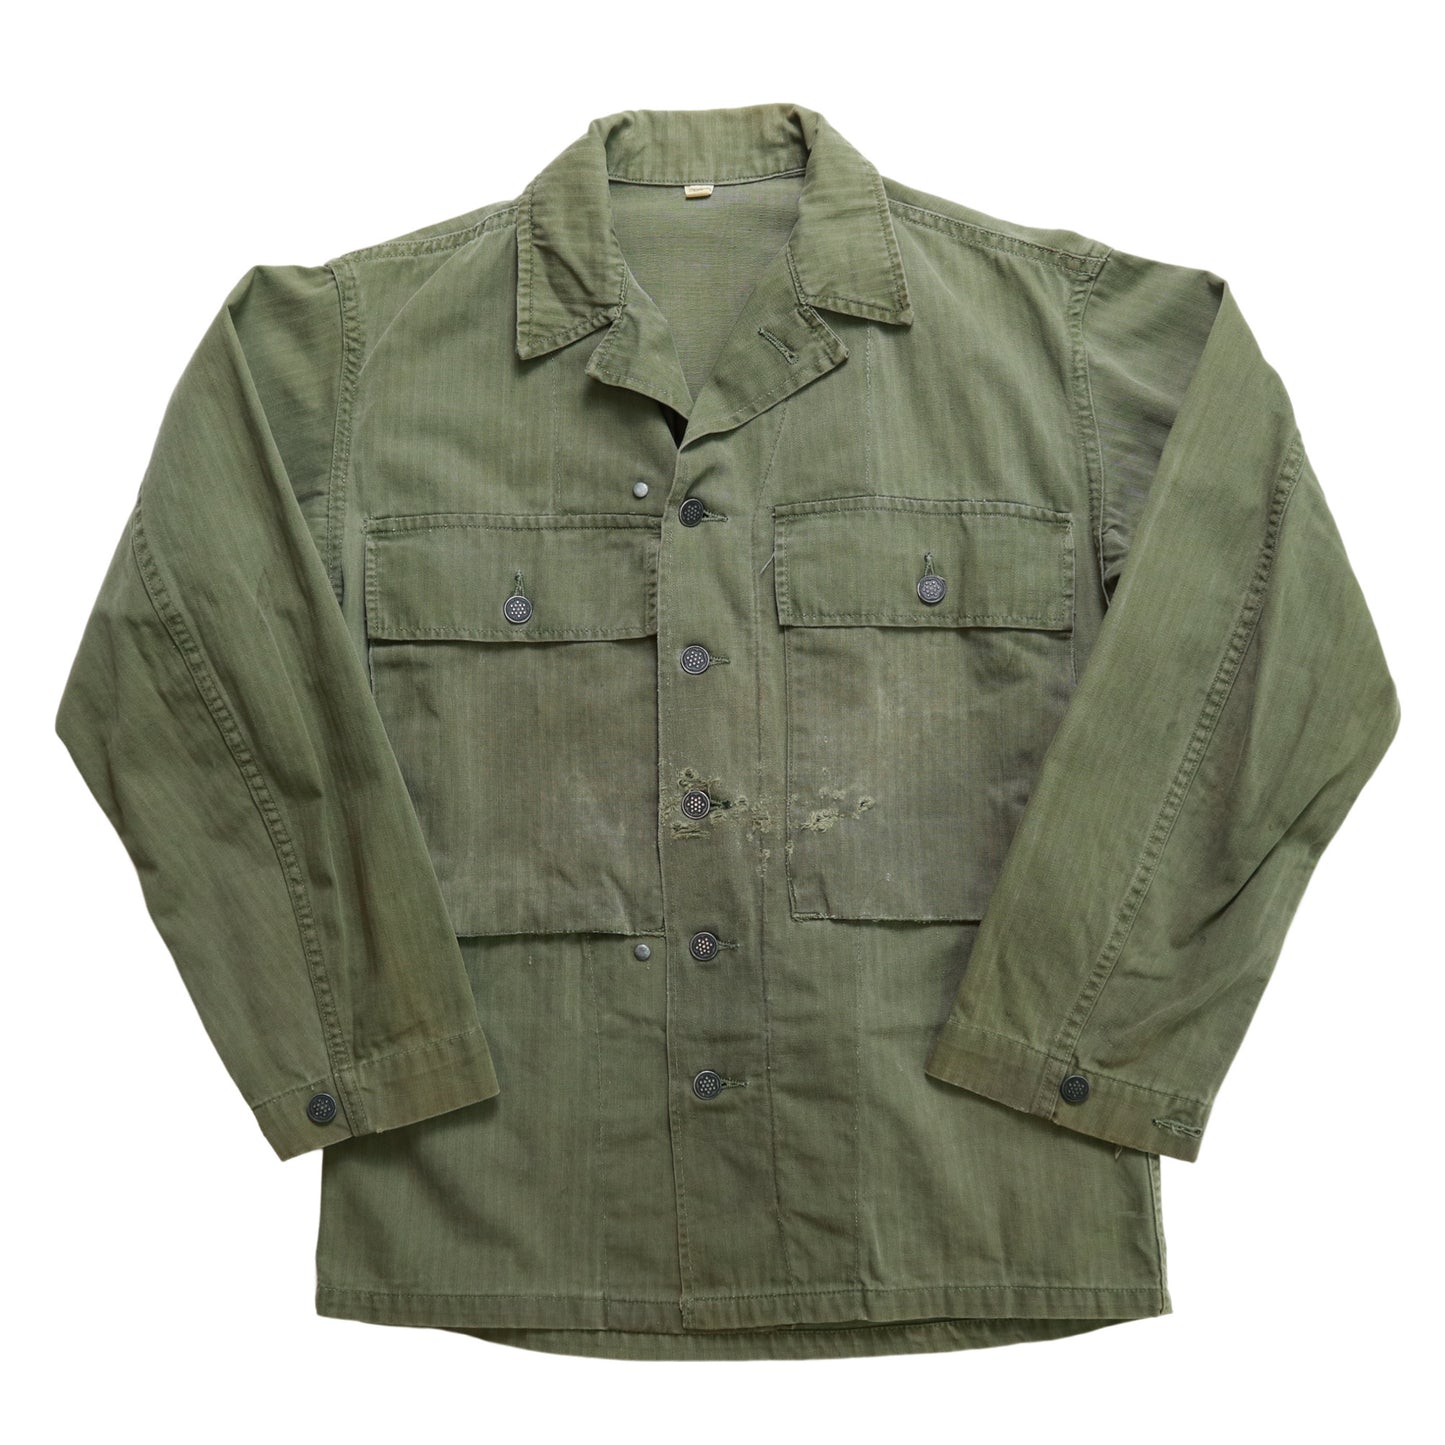 1940s WWII US ARMY M43 HBT Jacket/2nd Pattern/13 Star